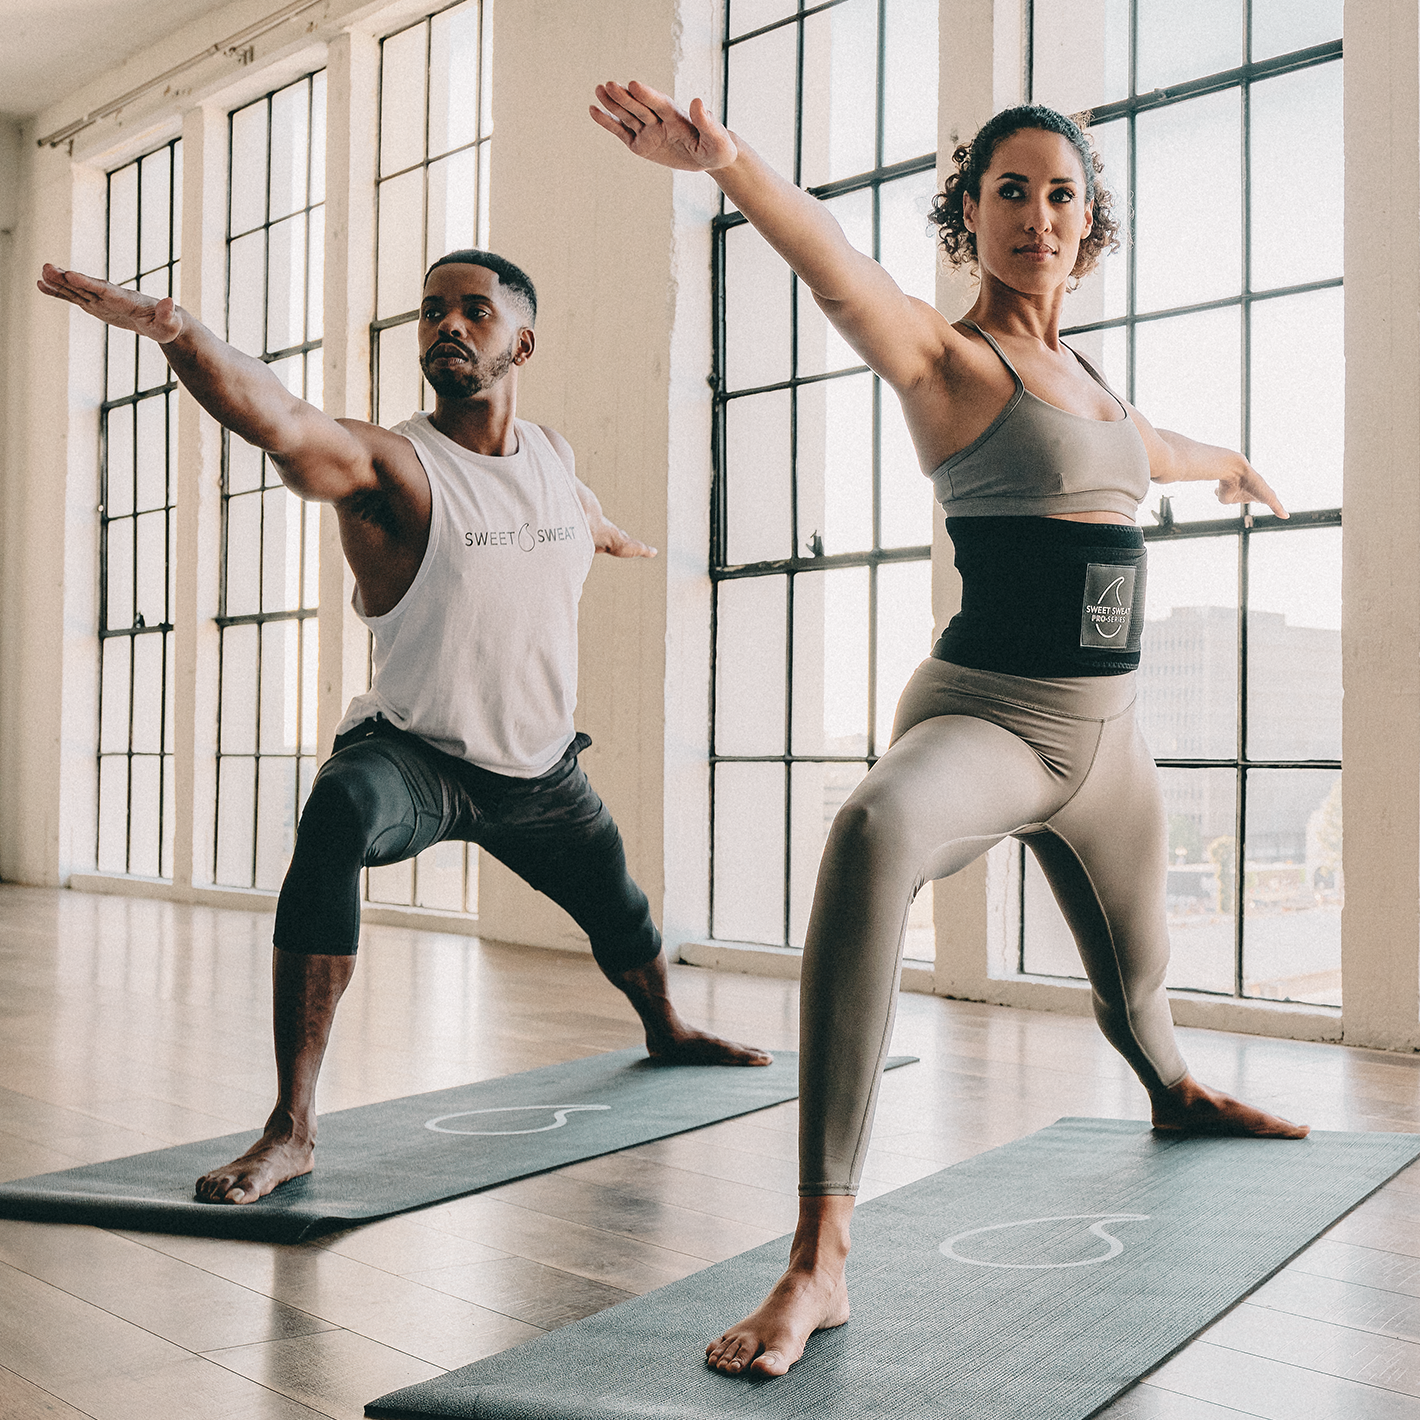 A man and woman practicing yoga poses on a Sweet Sweat yoga mat.